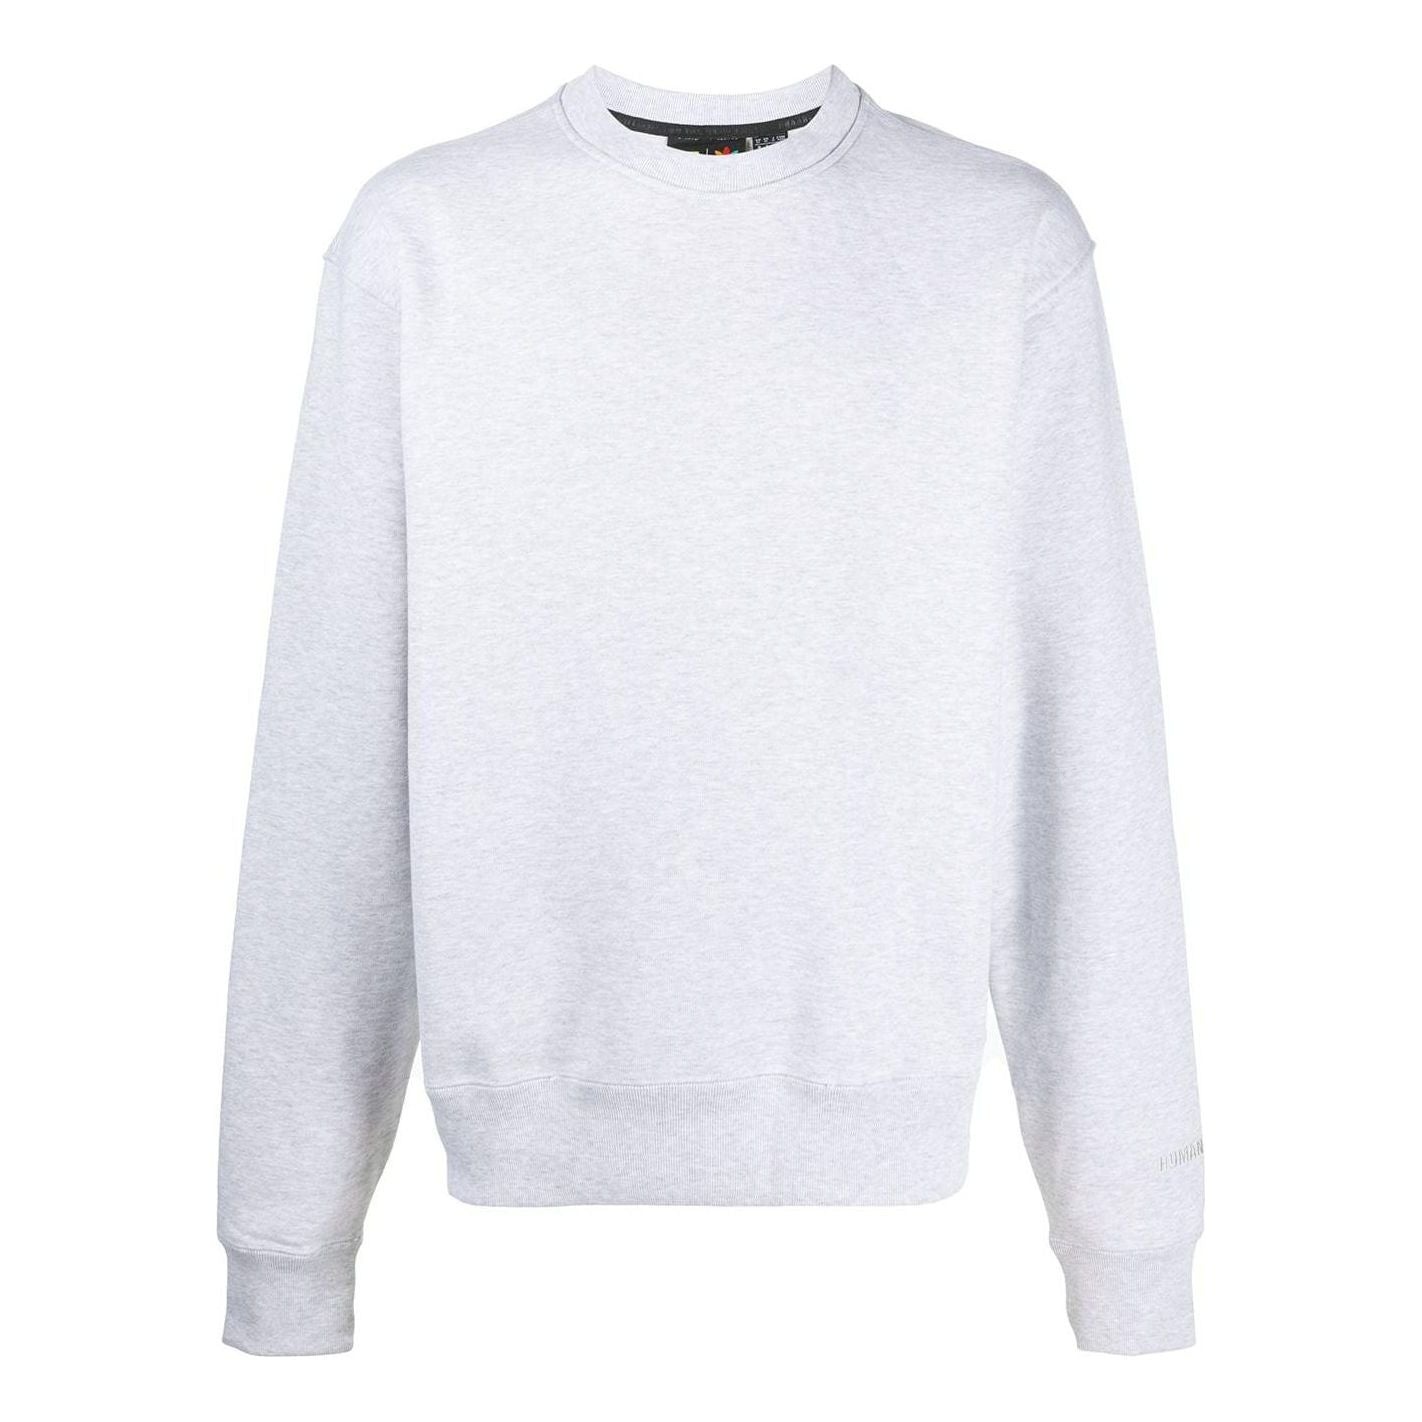 adidas x Pharrell Williams Crossover Solid Color Round Neck Cotton Pullover Long Sleeves Gray GM1973 - 1